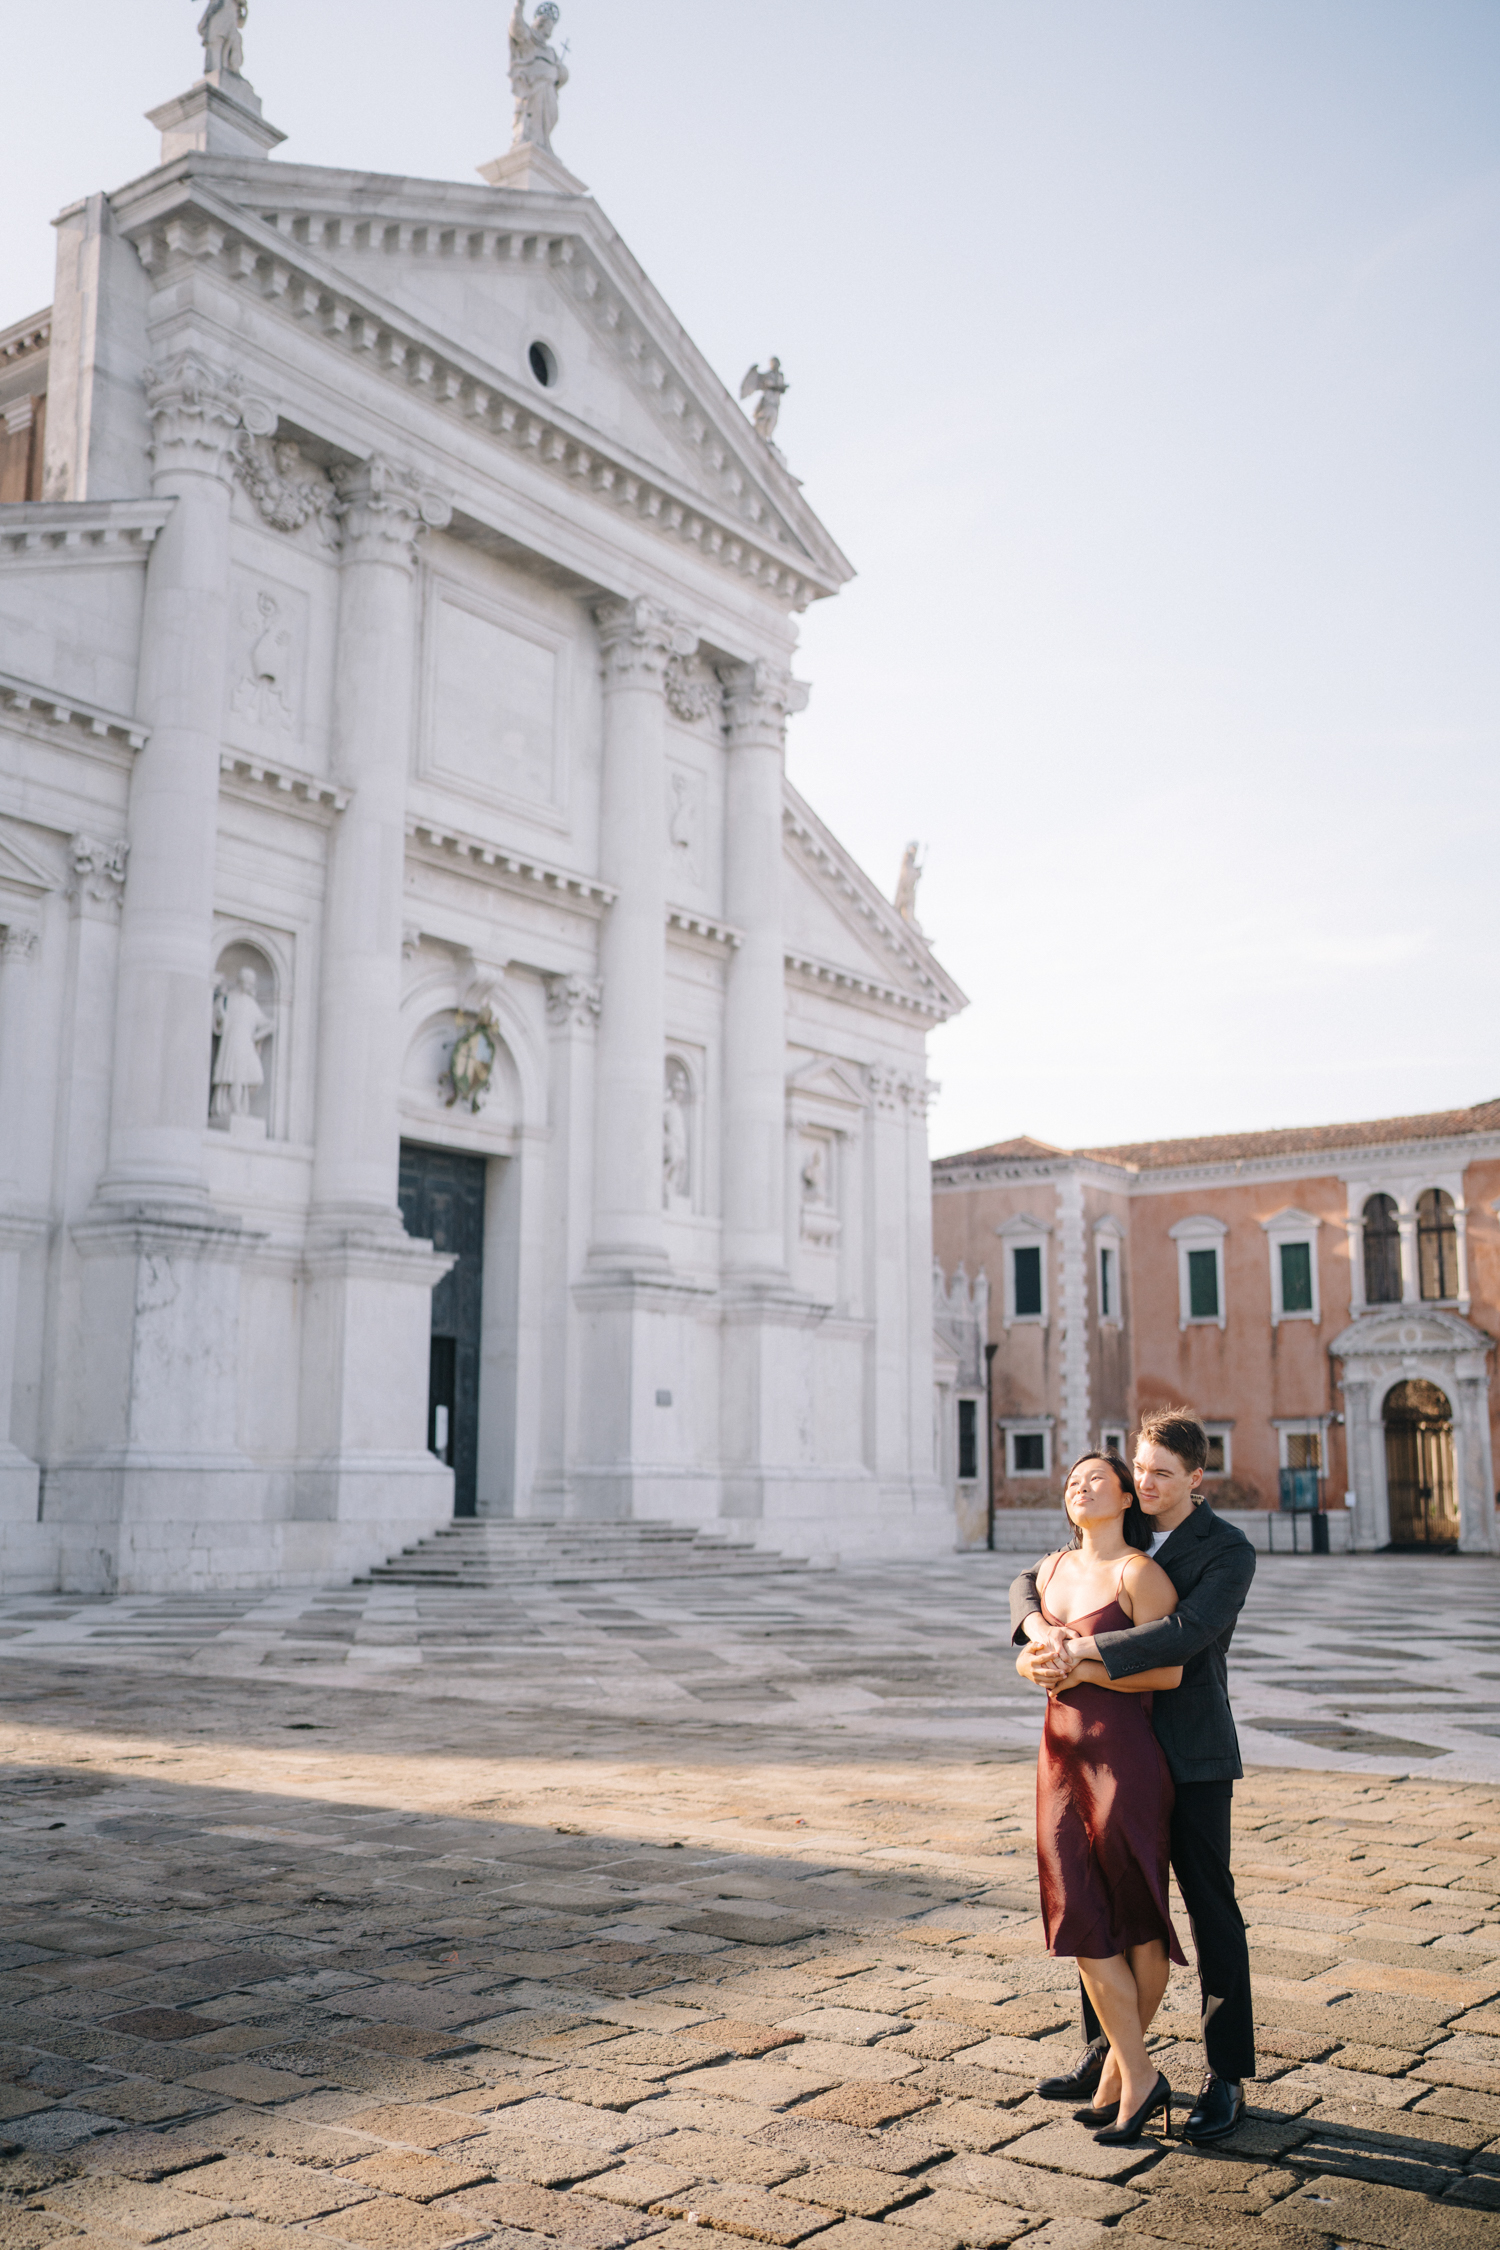 Italy portrait photographer, Alina Indi will capture your special romantic vacation in Venice